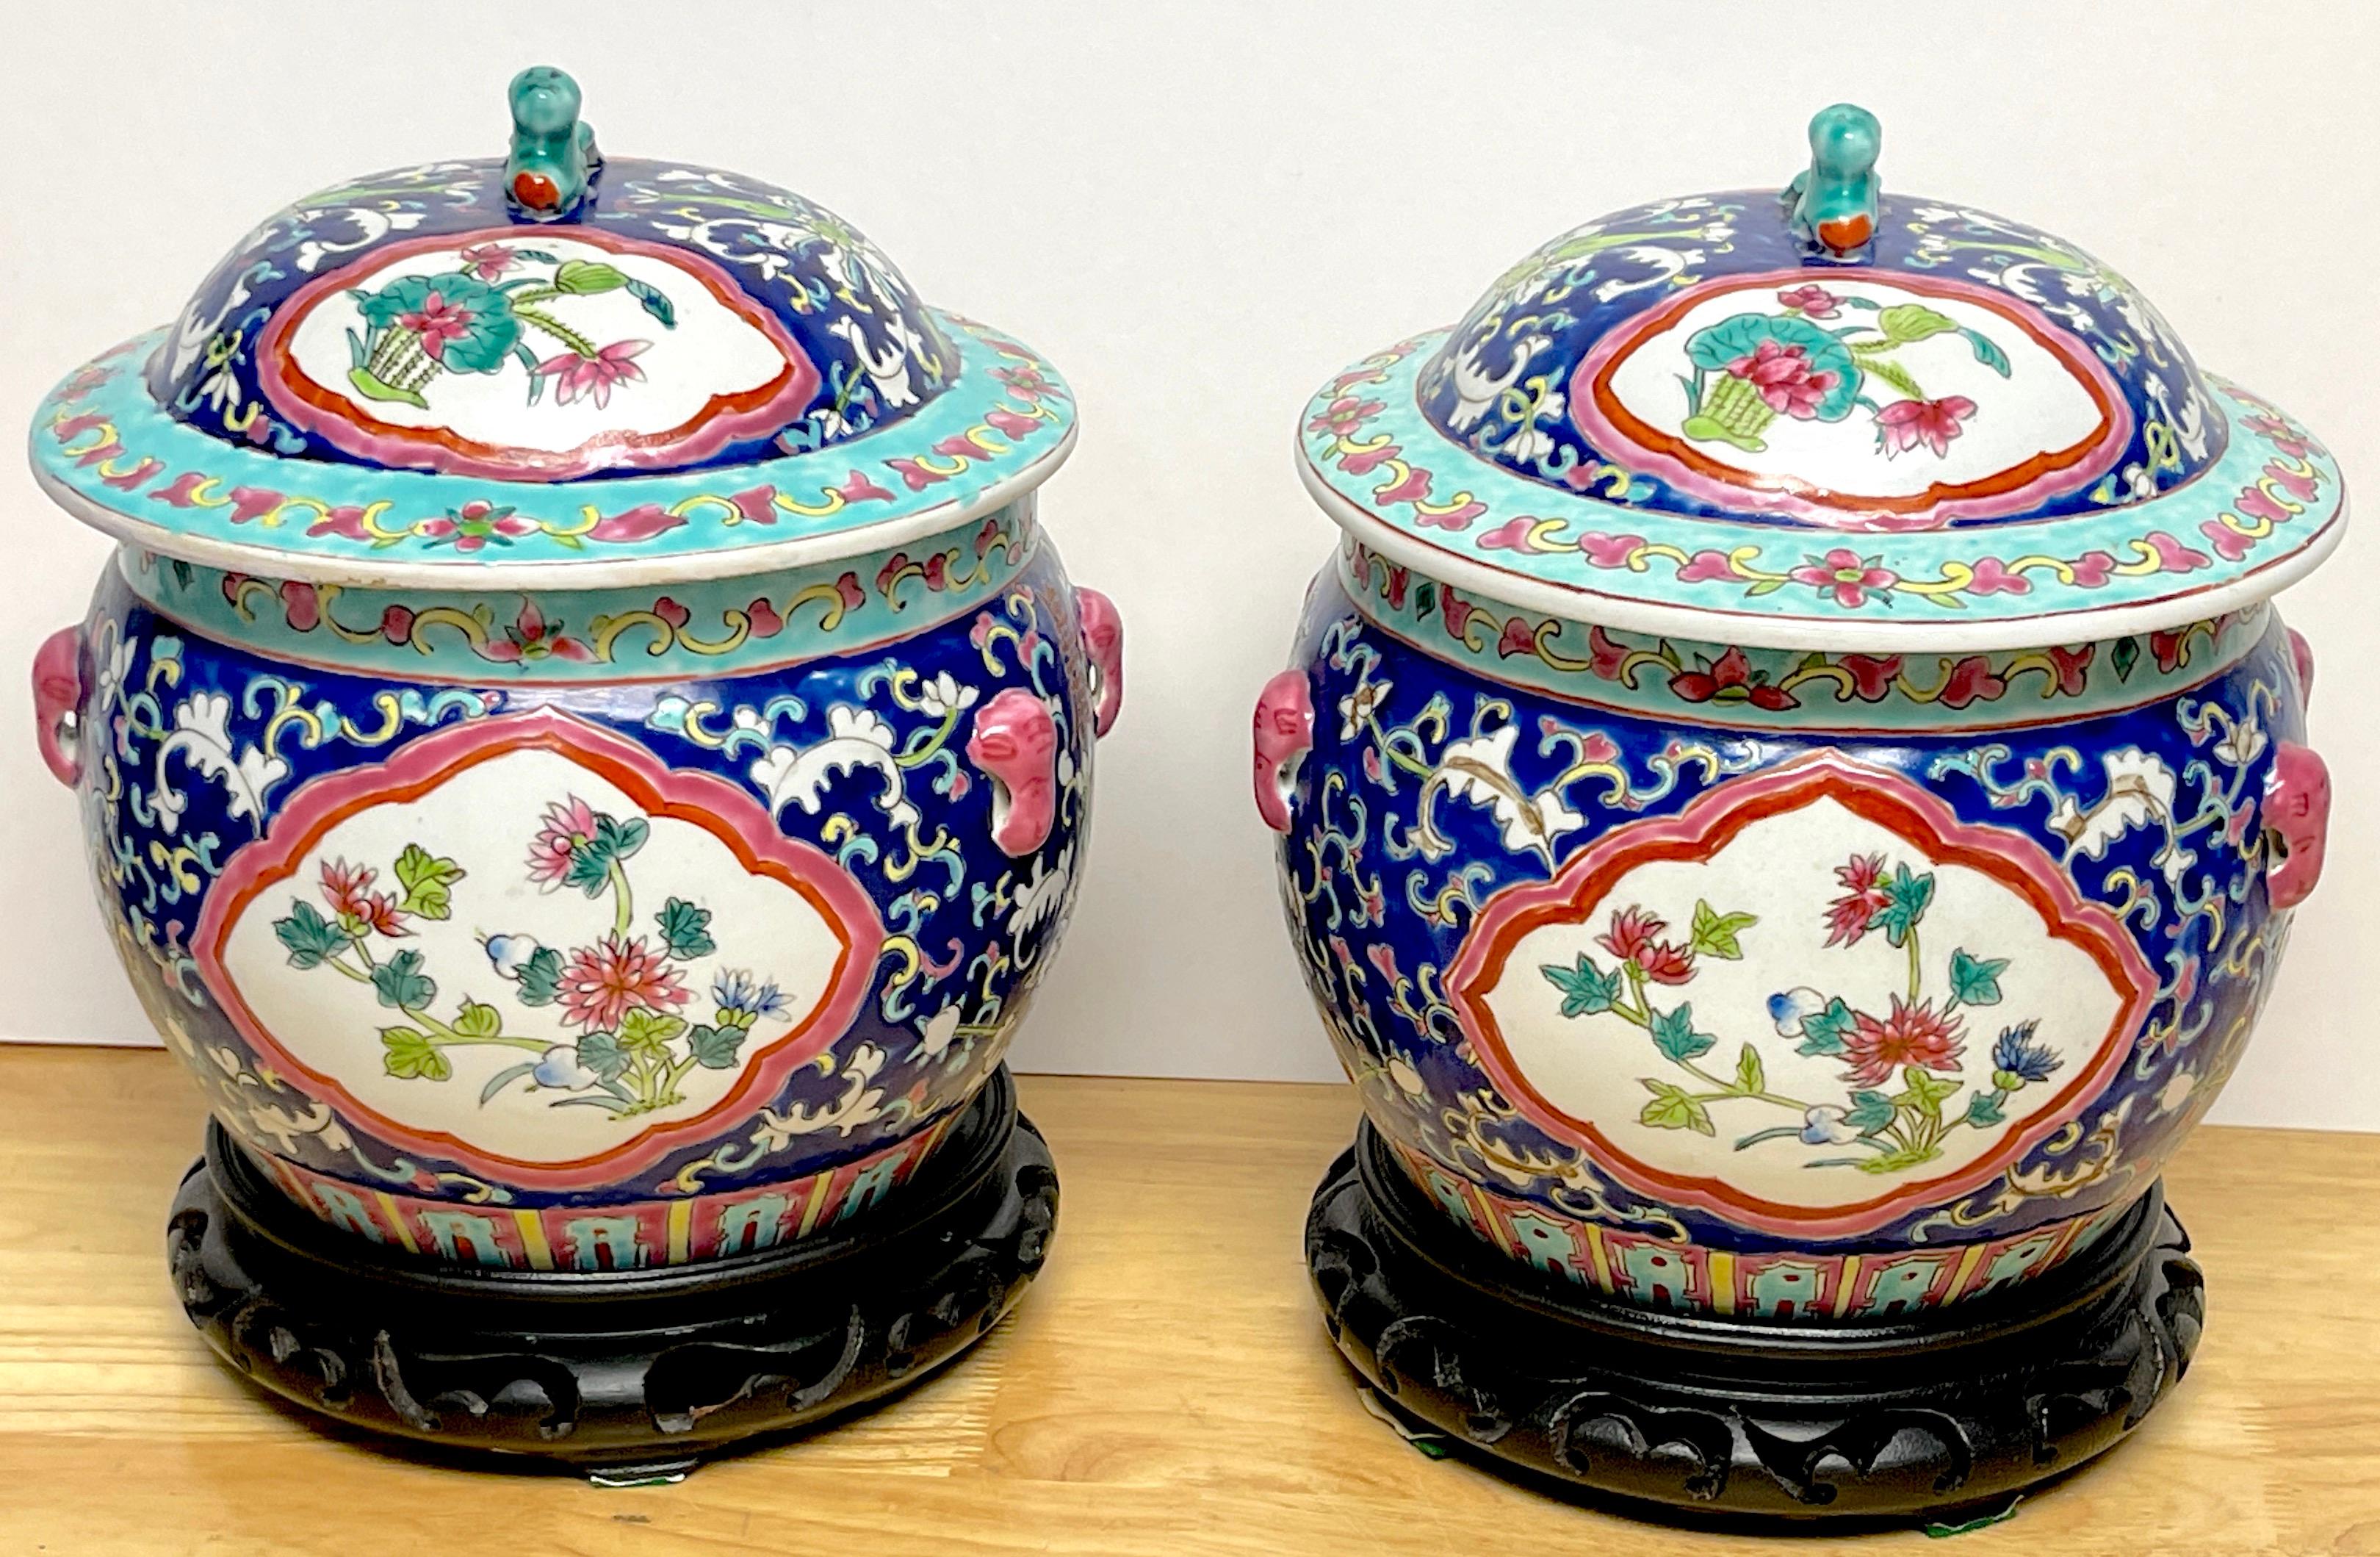 Pair of Chinese Export Famille-Rose Enameled Covered Urns & Stands 
China, 20th Century 

A nice pair of intricately and vibrantly decorated famille-rose covered urns, would make beautiful cachepots, if used without the lids.  Each one marked with a